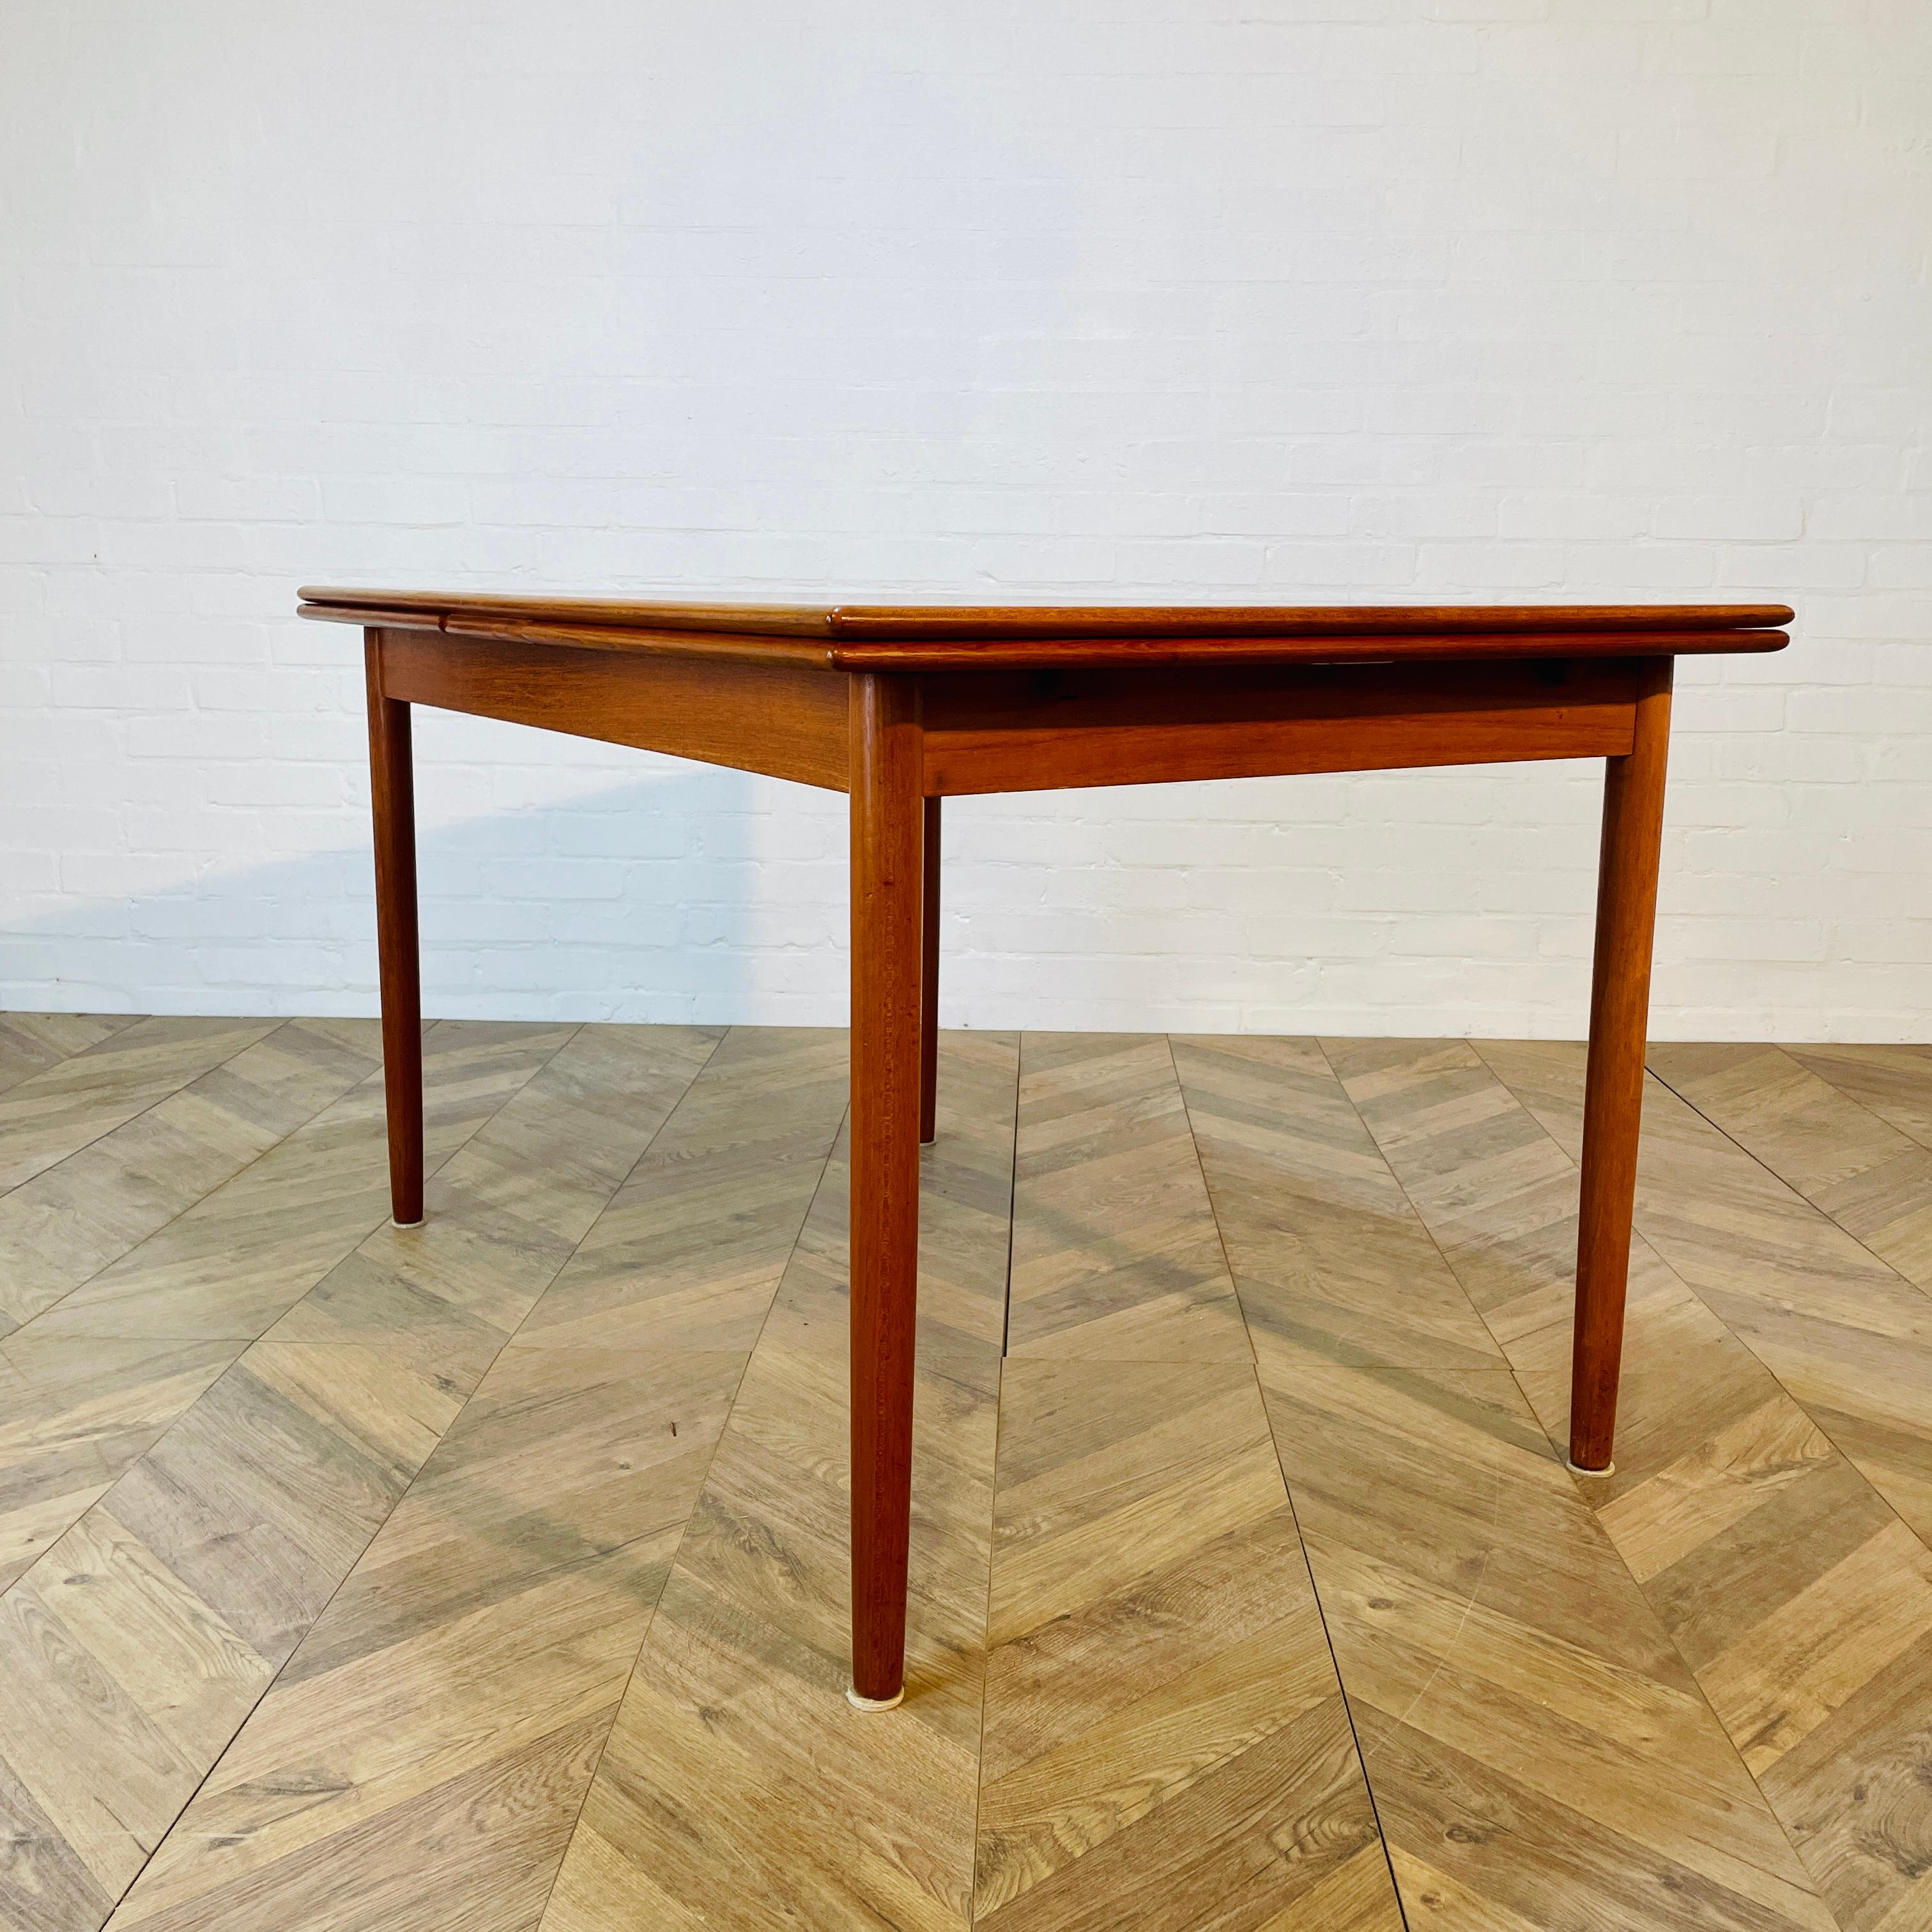 Vintage Mid-Century Extending Dining Table Designed by K A Jorgensen for A/S Mobelfabrik, 1974.

A beautifully designed table, with extending leaves, which are concealed underneath. With a bullet edge and in good vintage condition, with light wear